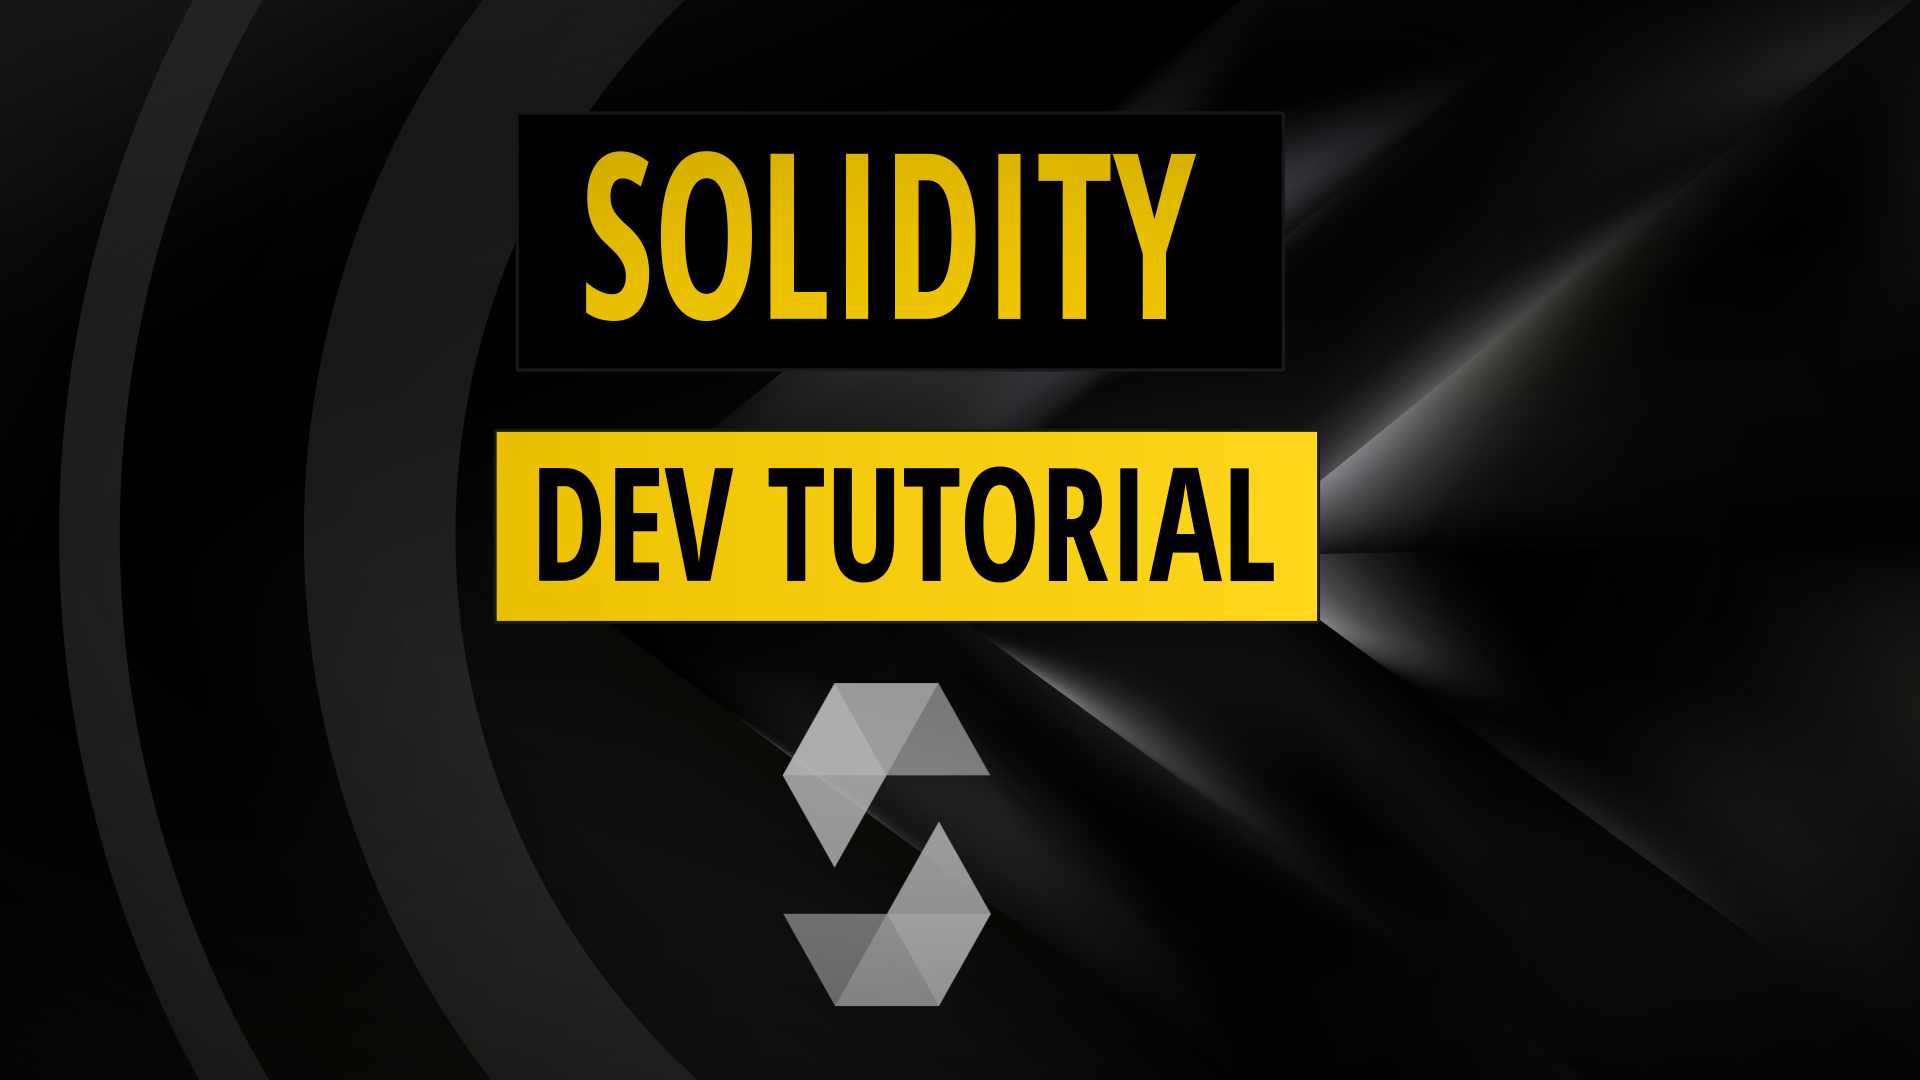 Solidity Tutorial | For Developers Coming From Javascript, C++, Python